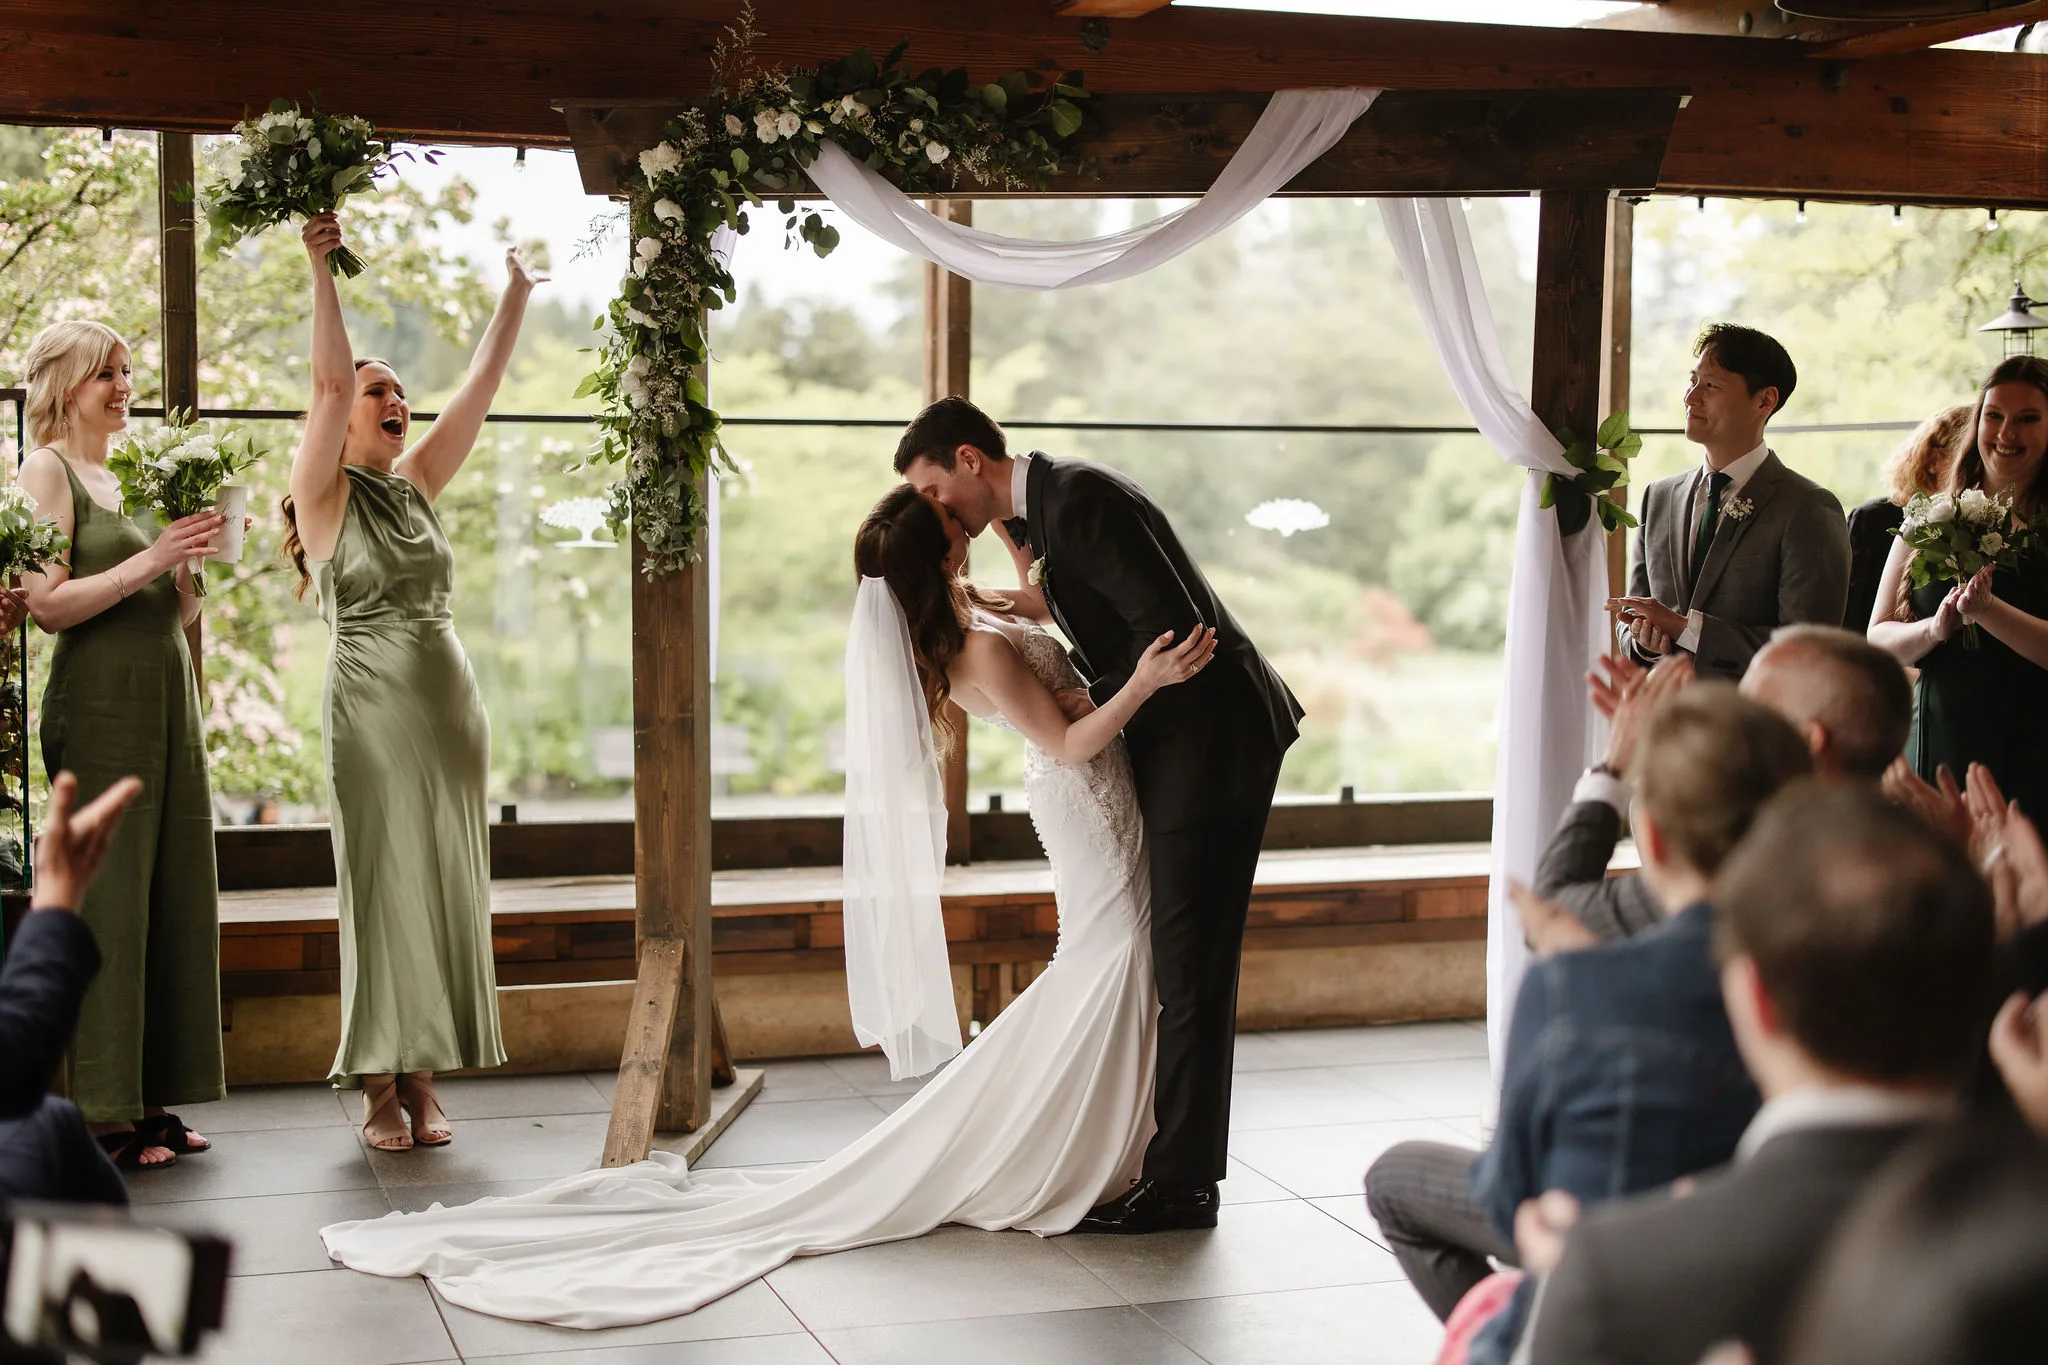 Newlyweds sharing their first kiss after their Young Hip & Married ceremony while guests cheer